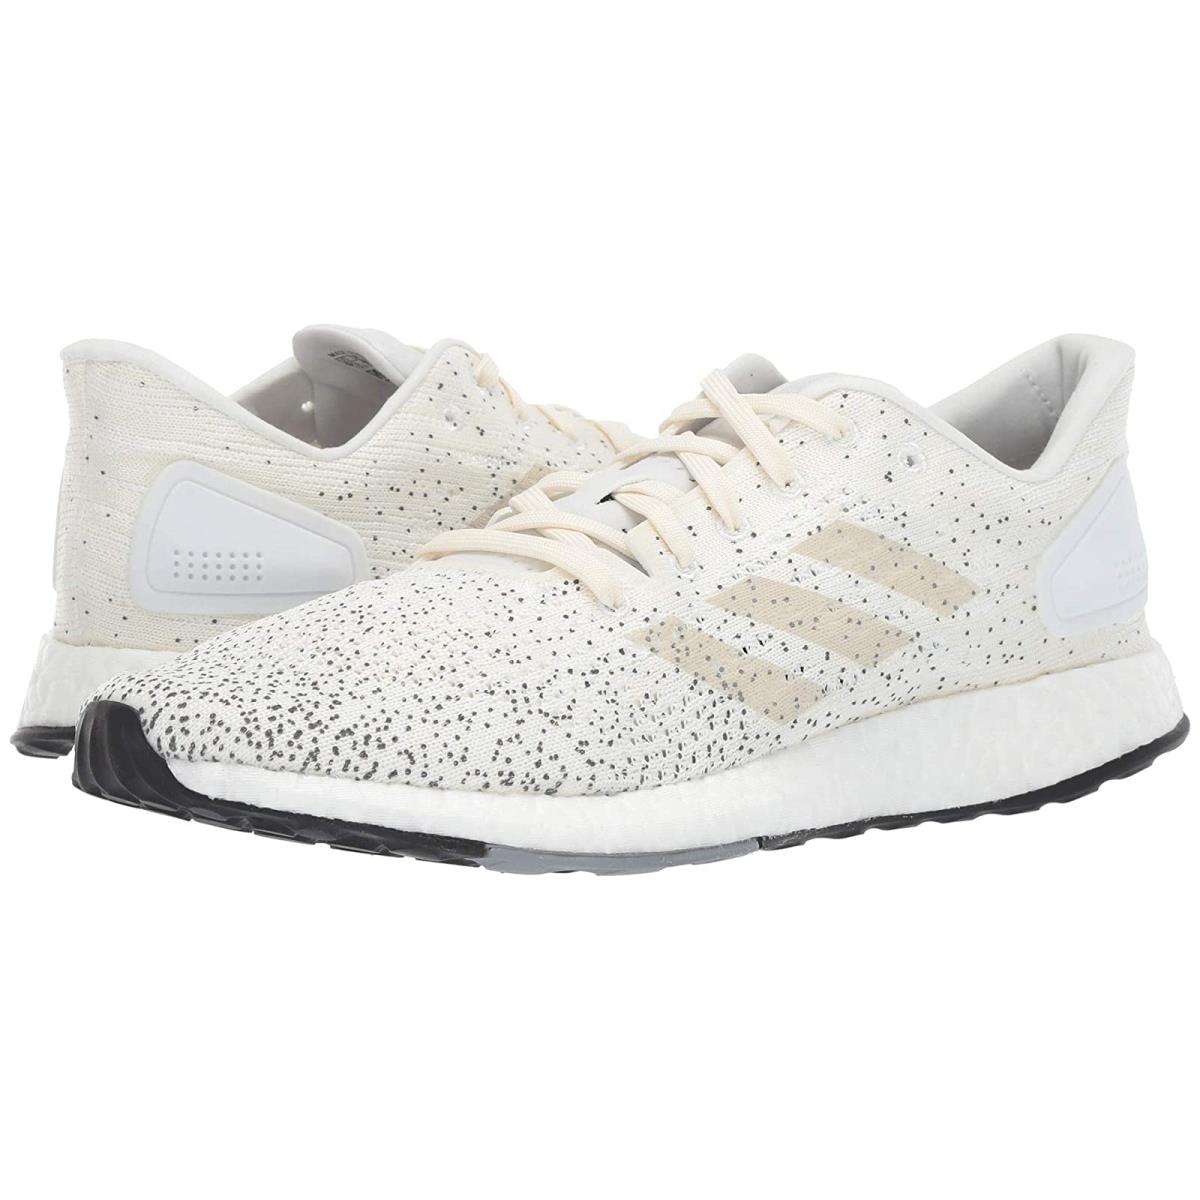 Woman`s Sneakers Athletic Shoes Adidas Running Pureboost Dpr Footwear White/Raw White/Grey Three